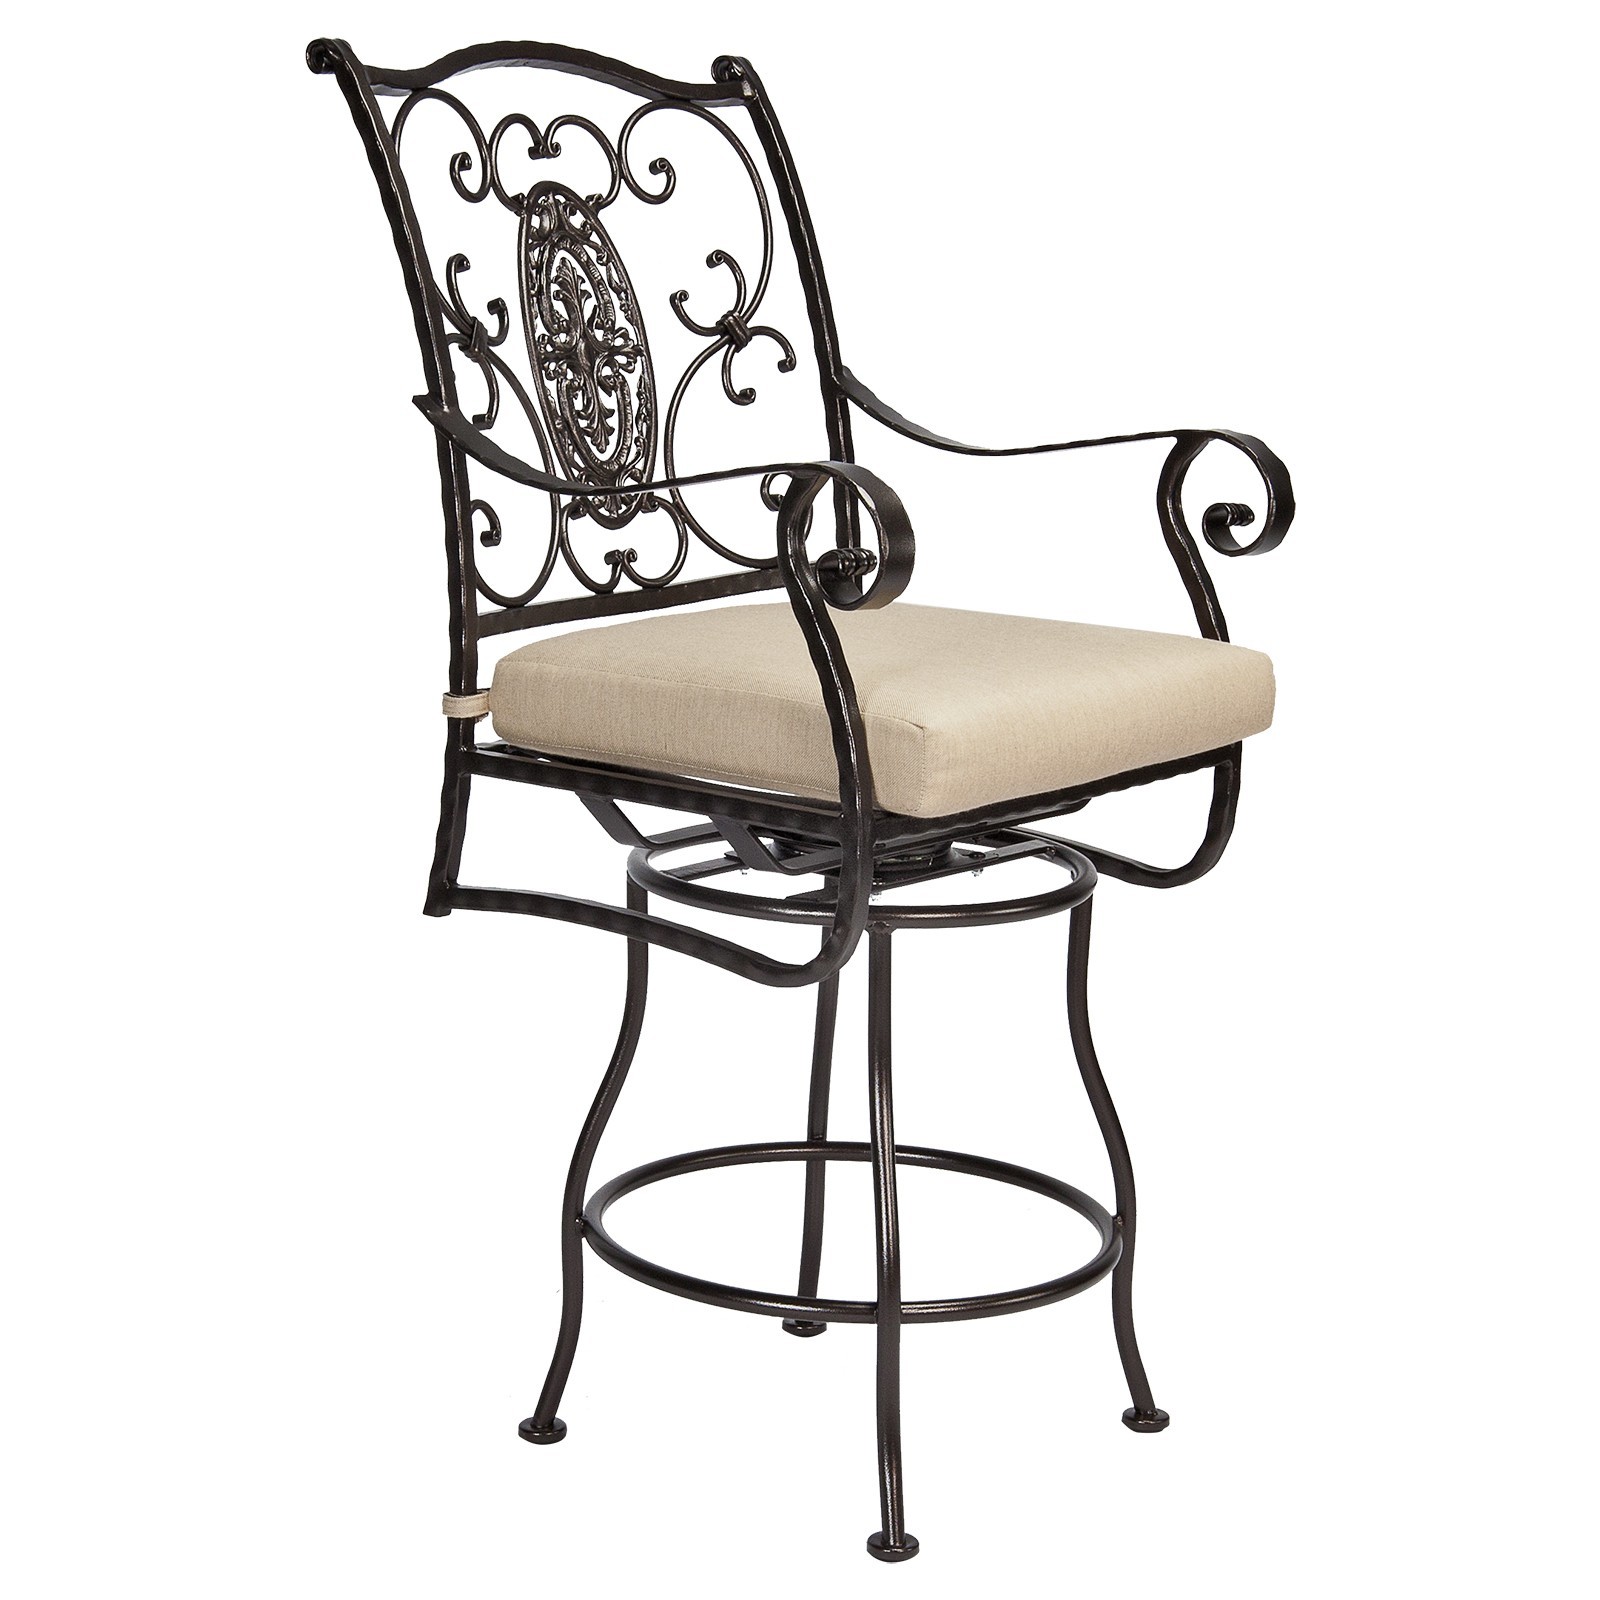 San Cristobal Swivel Counter Stool With Arms San Cristobal Swivel Counter Stool With Arms - Hauser's Patio